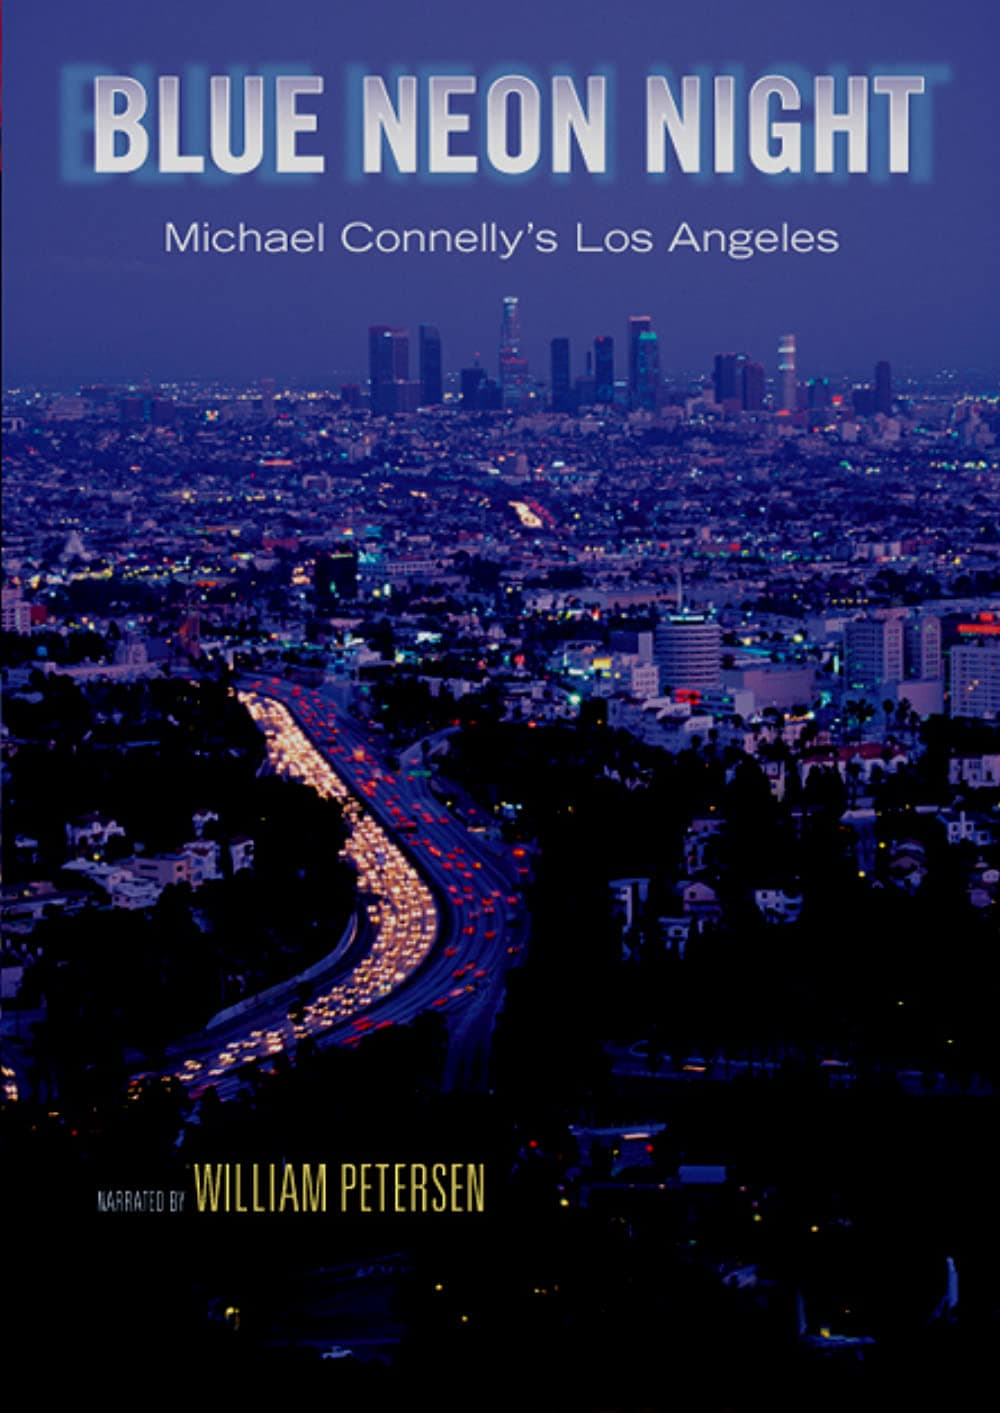 Blue Neon Night: Michael Connelly's Los Angeles (2004)